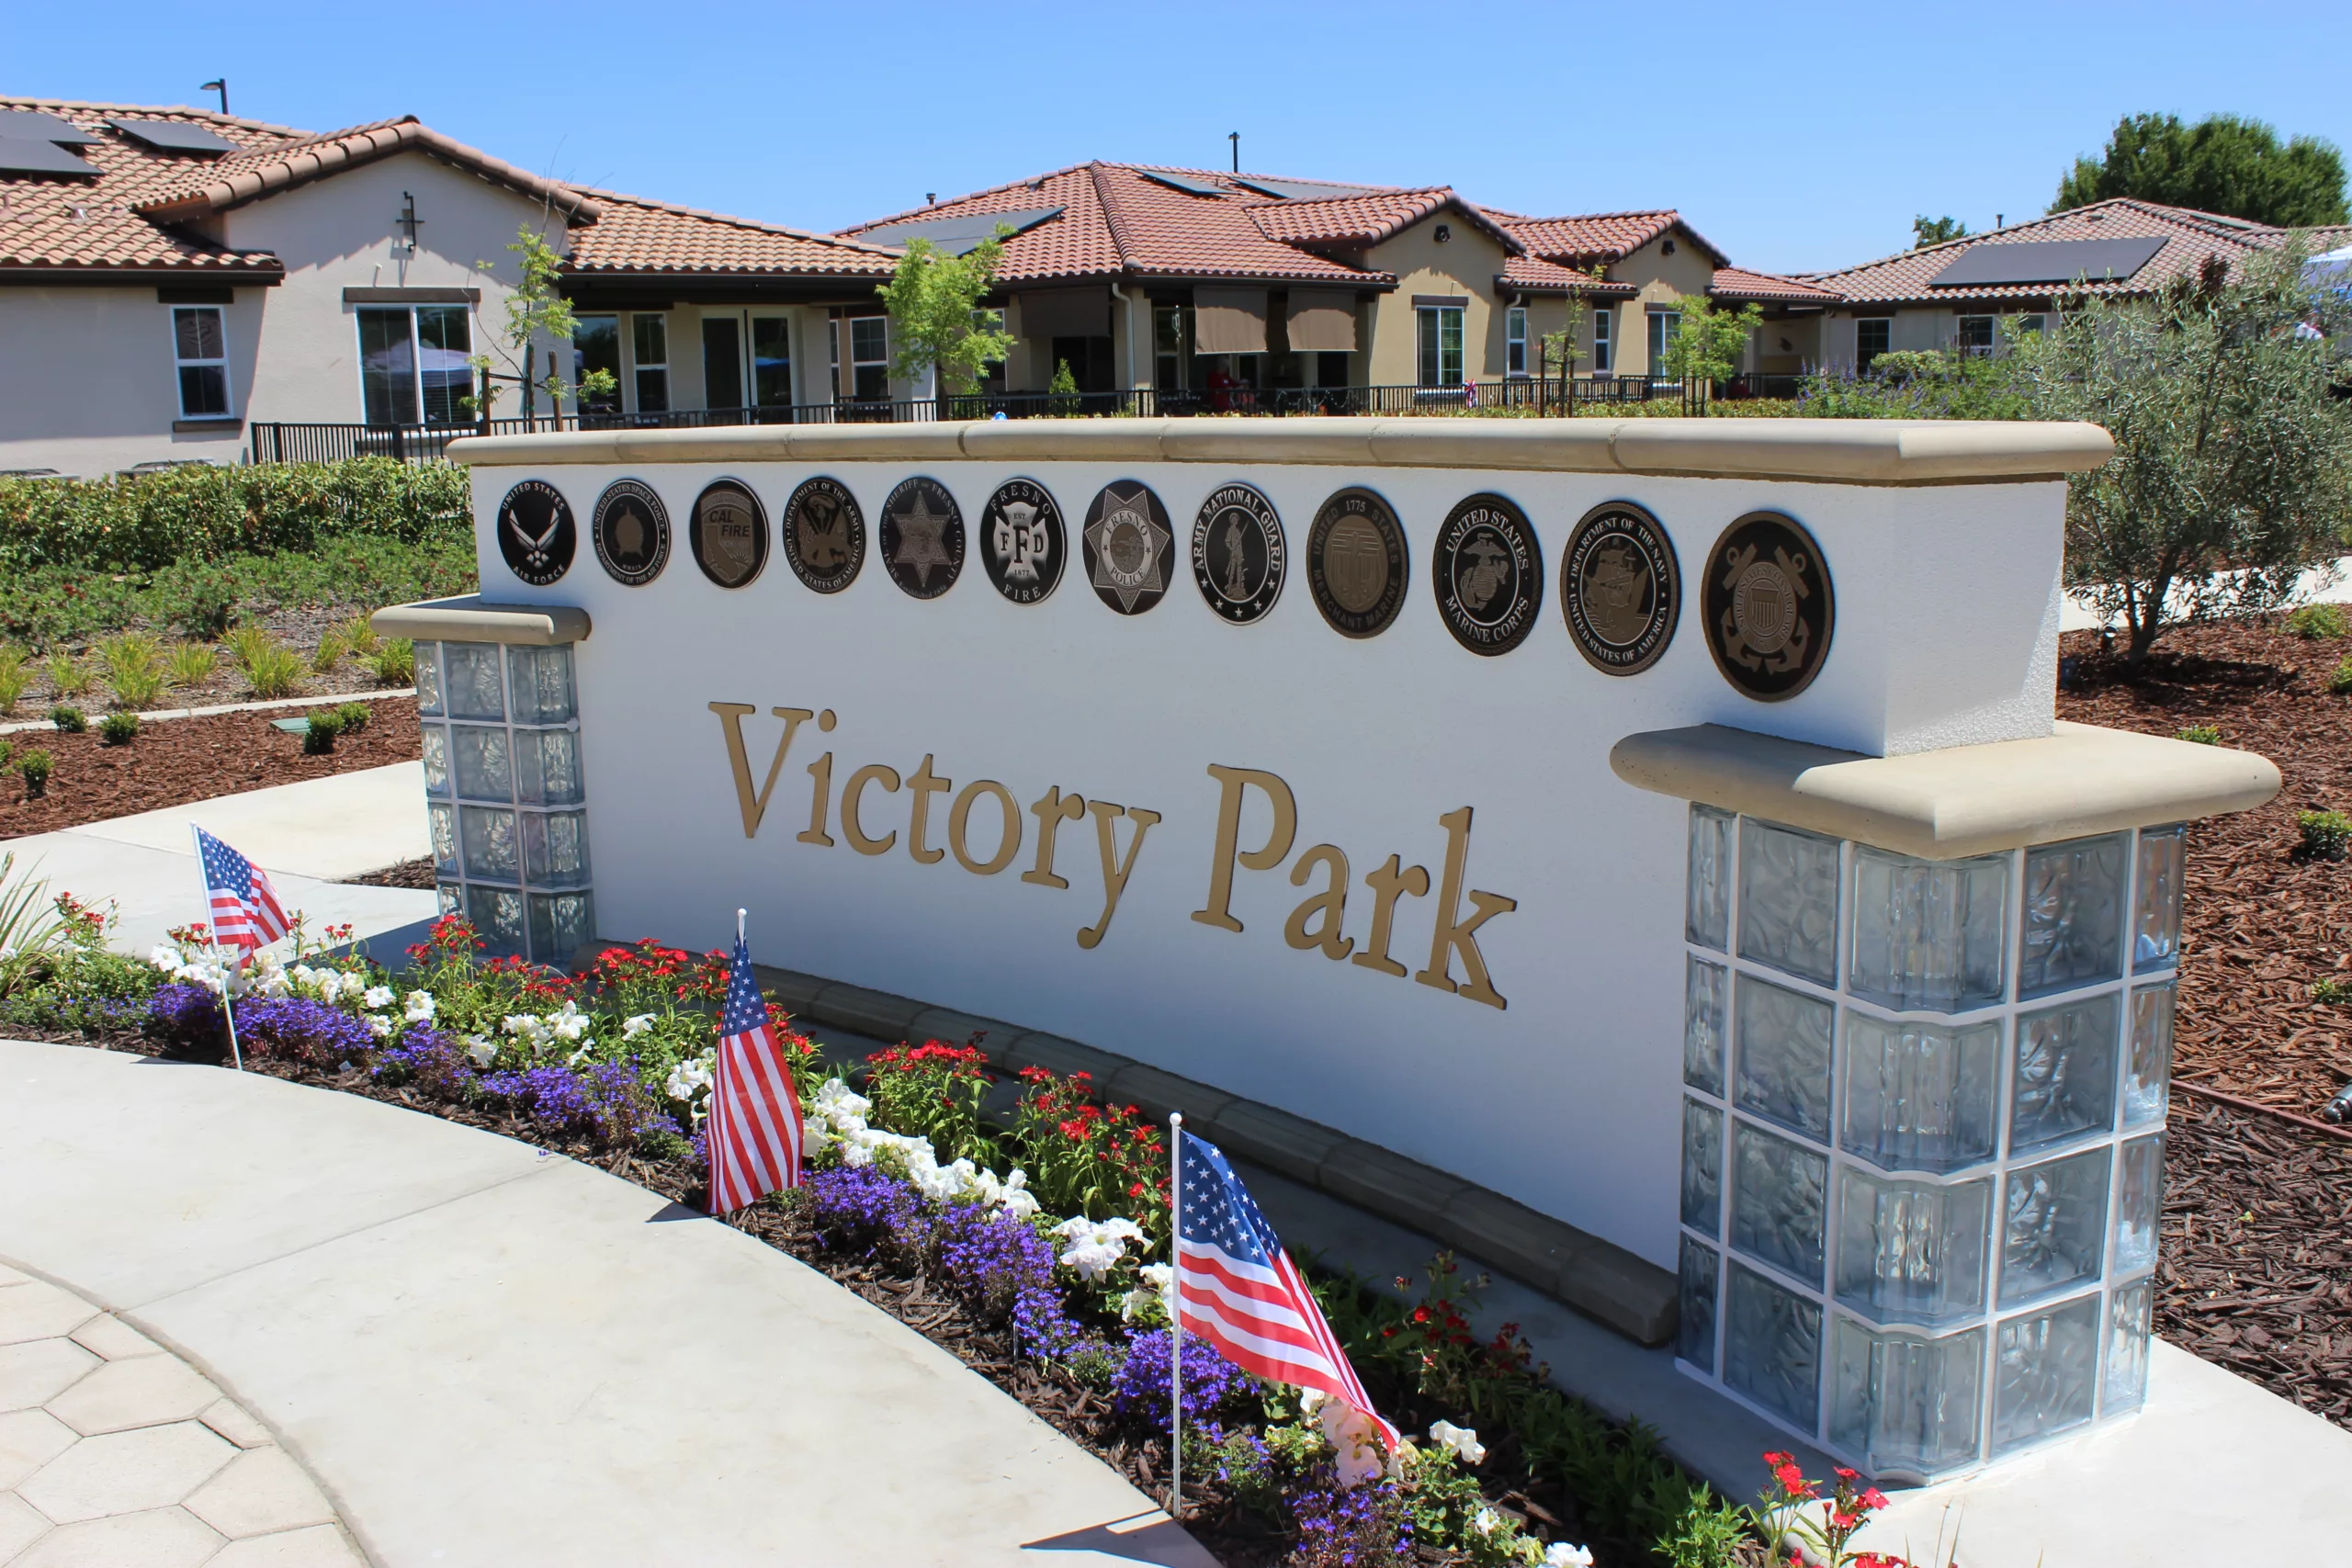 From Start to Finish: Victory Park